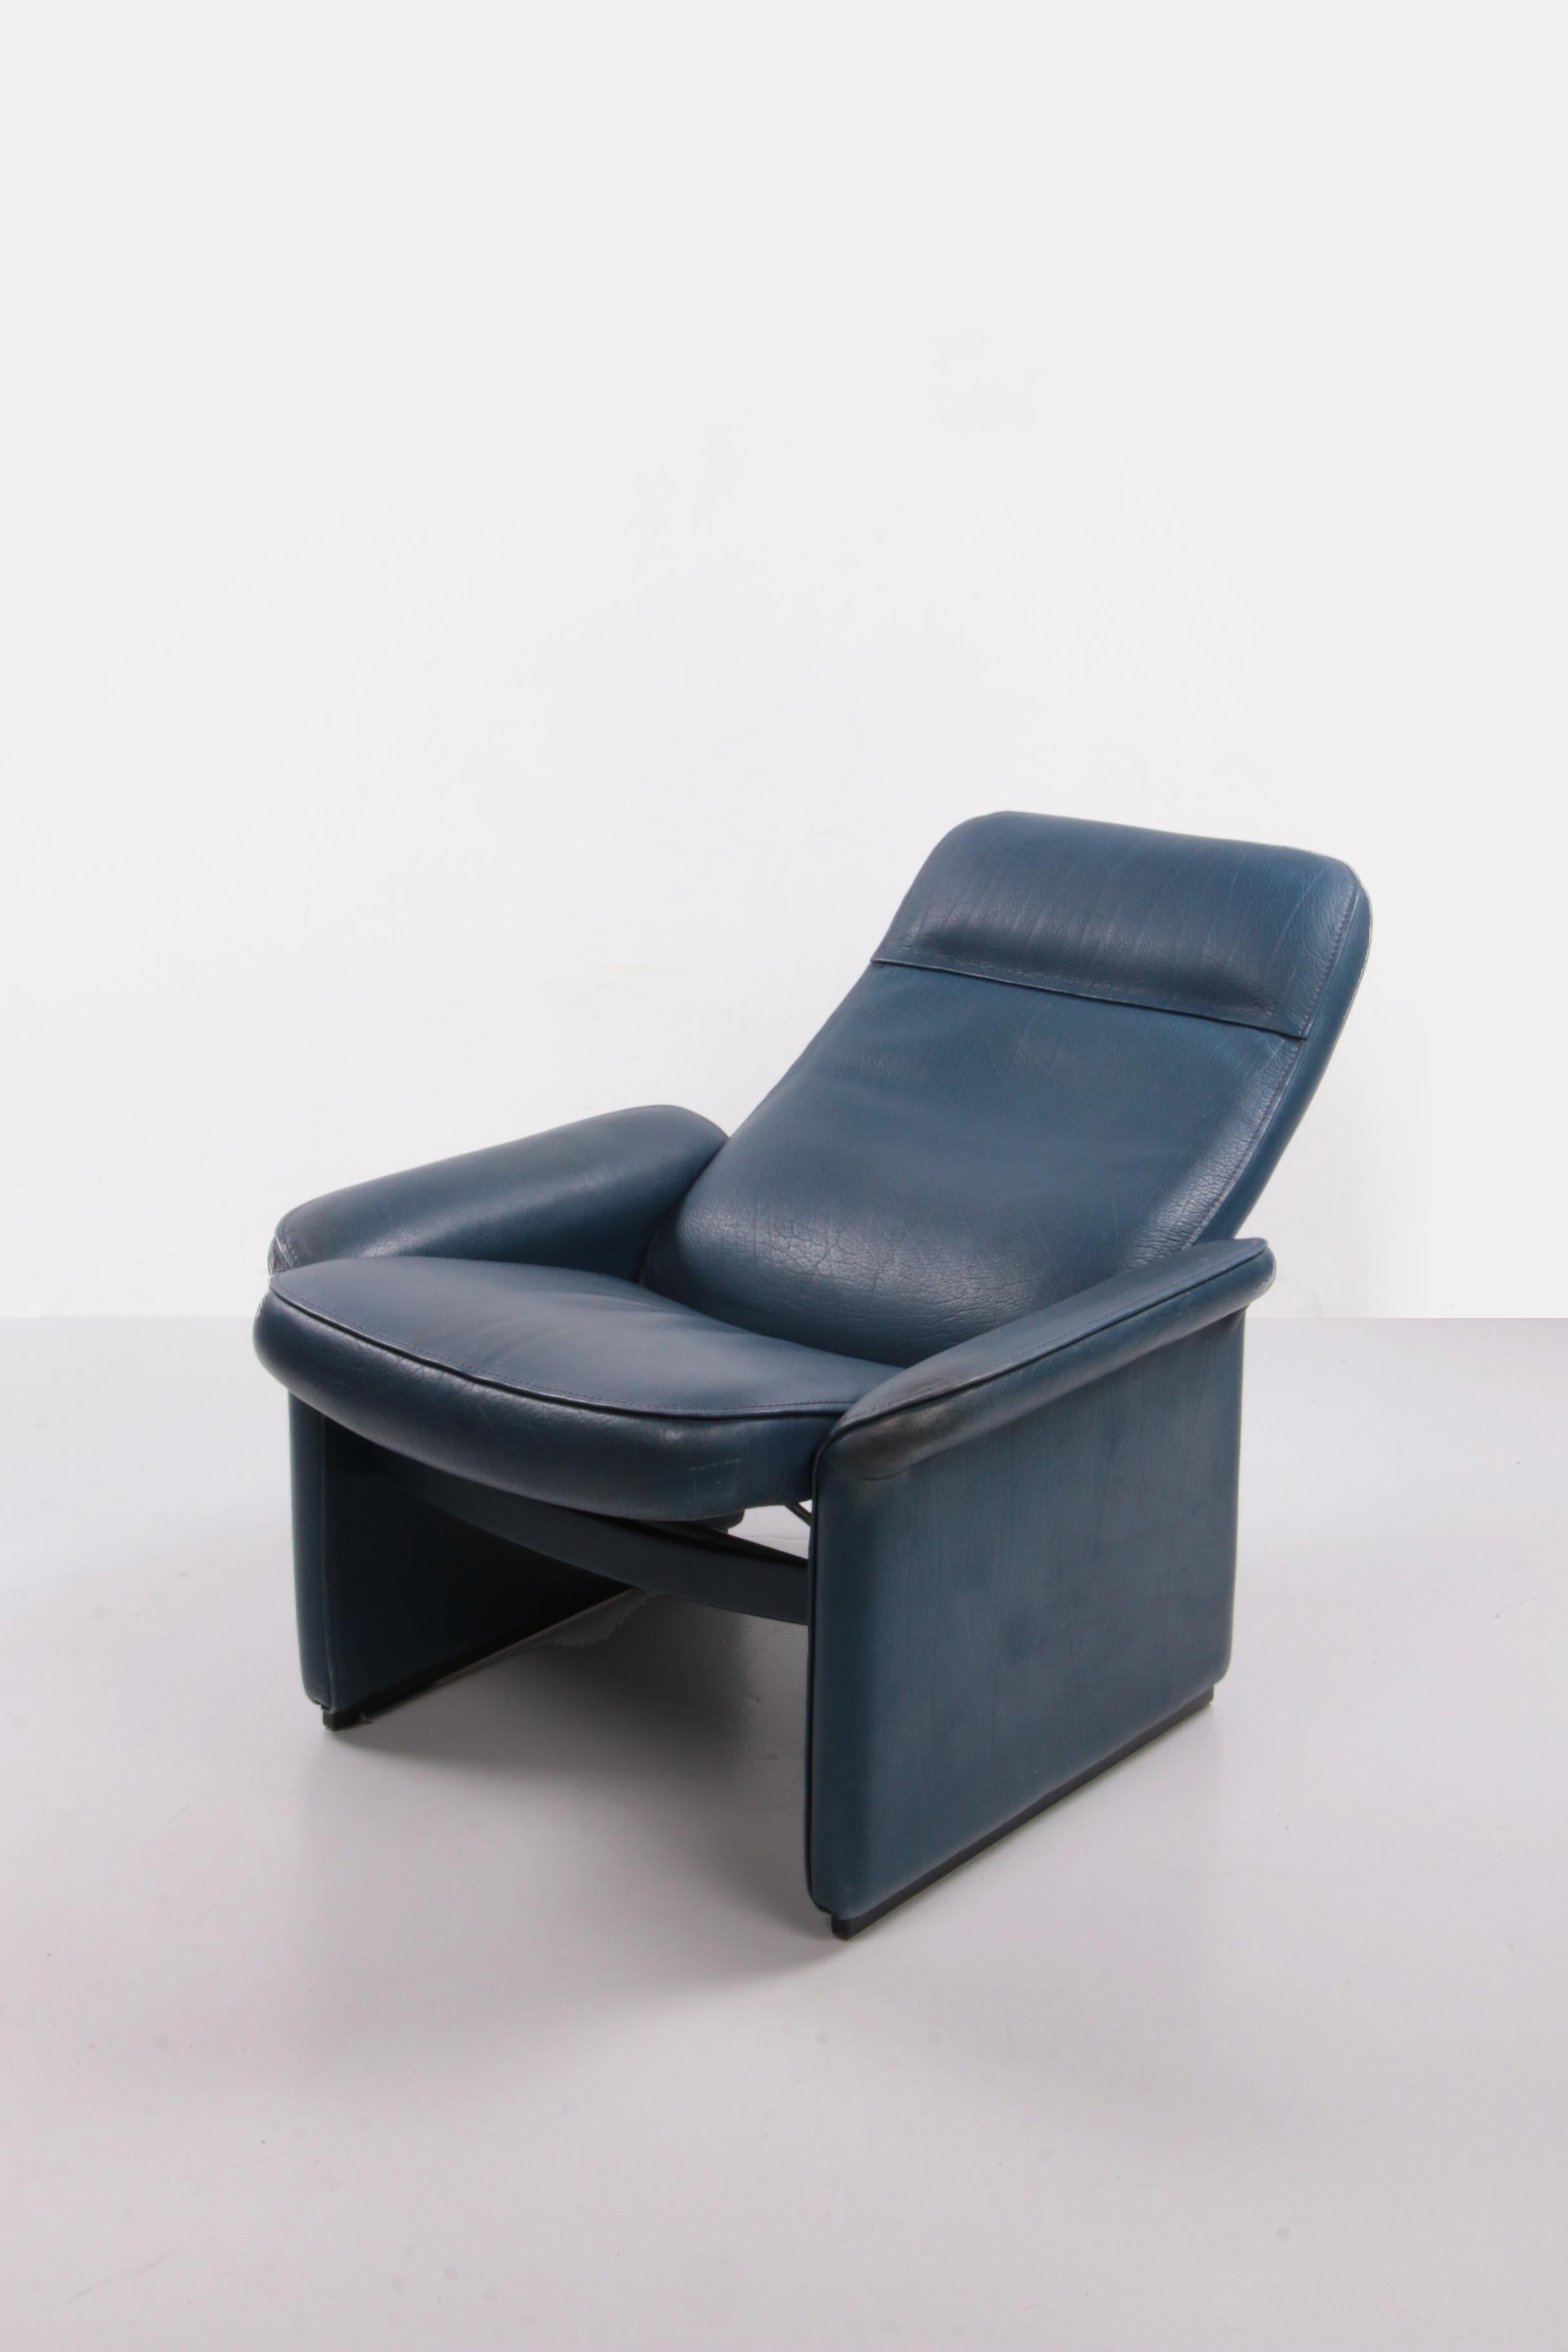 De Sede Ds 50 Relax Armchair with Hocker Leather Petrol Colour, 1980 Switzerland 1